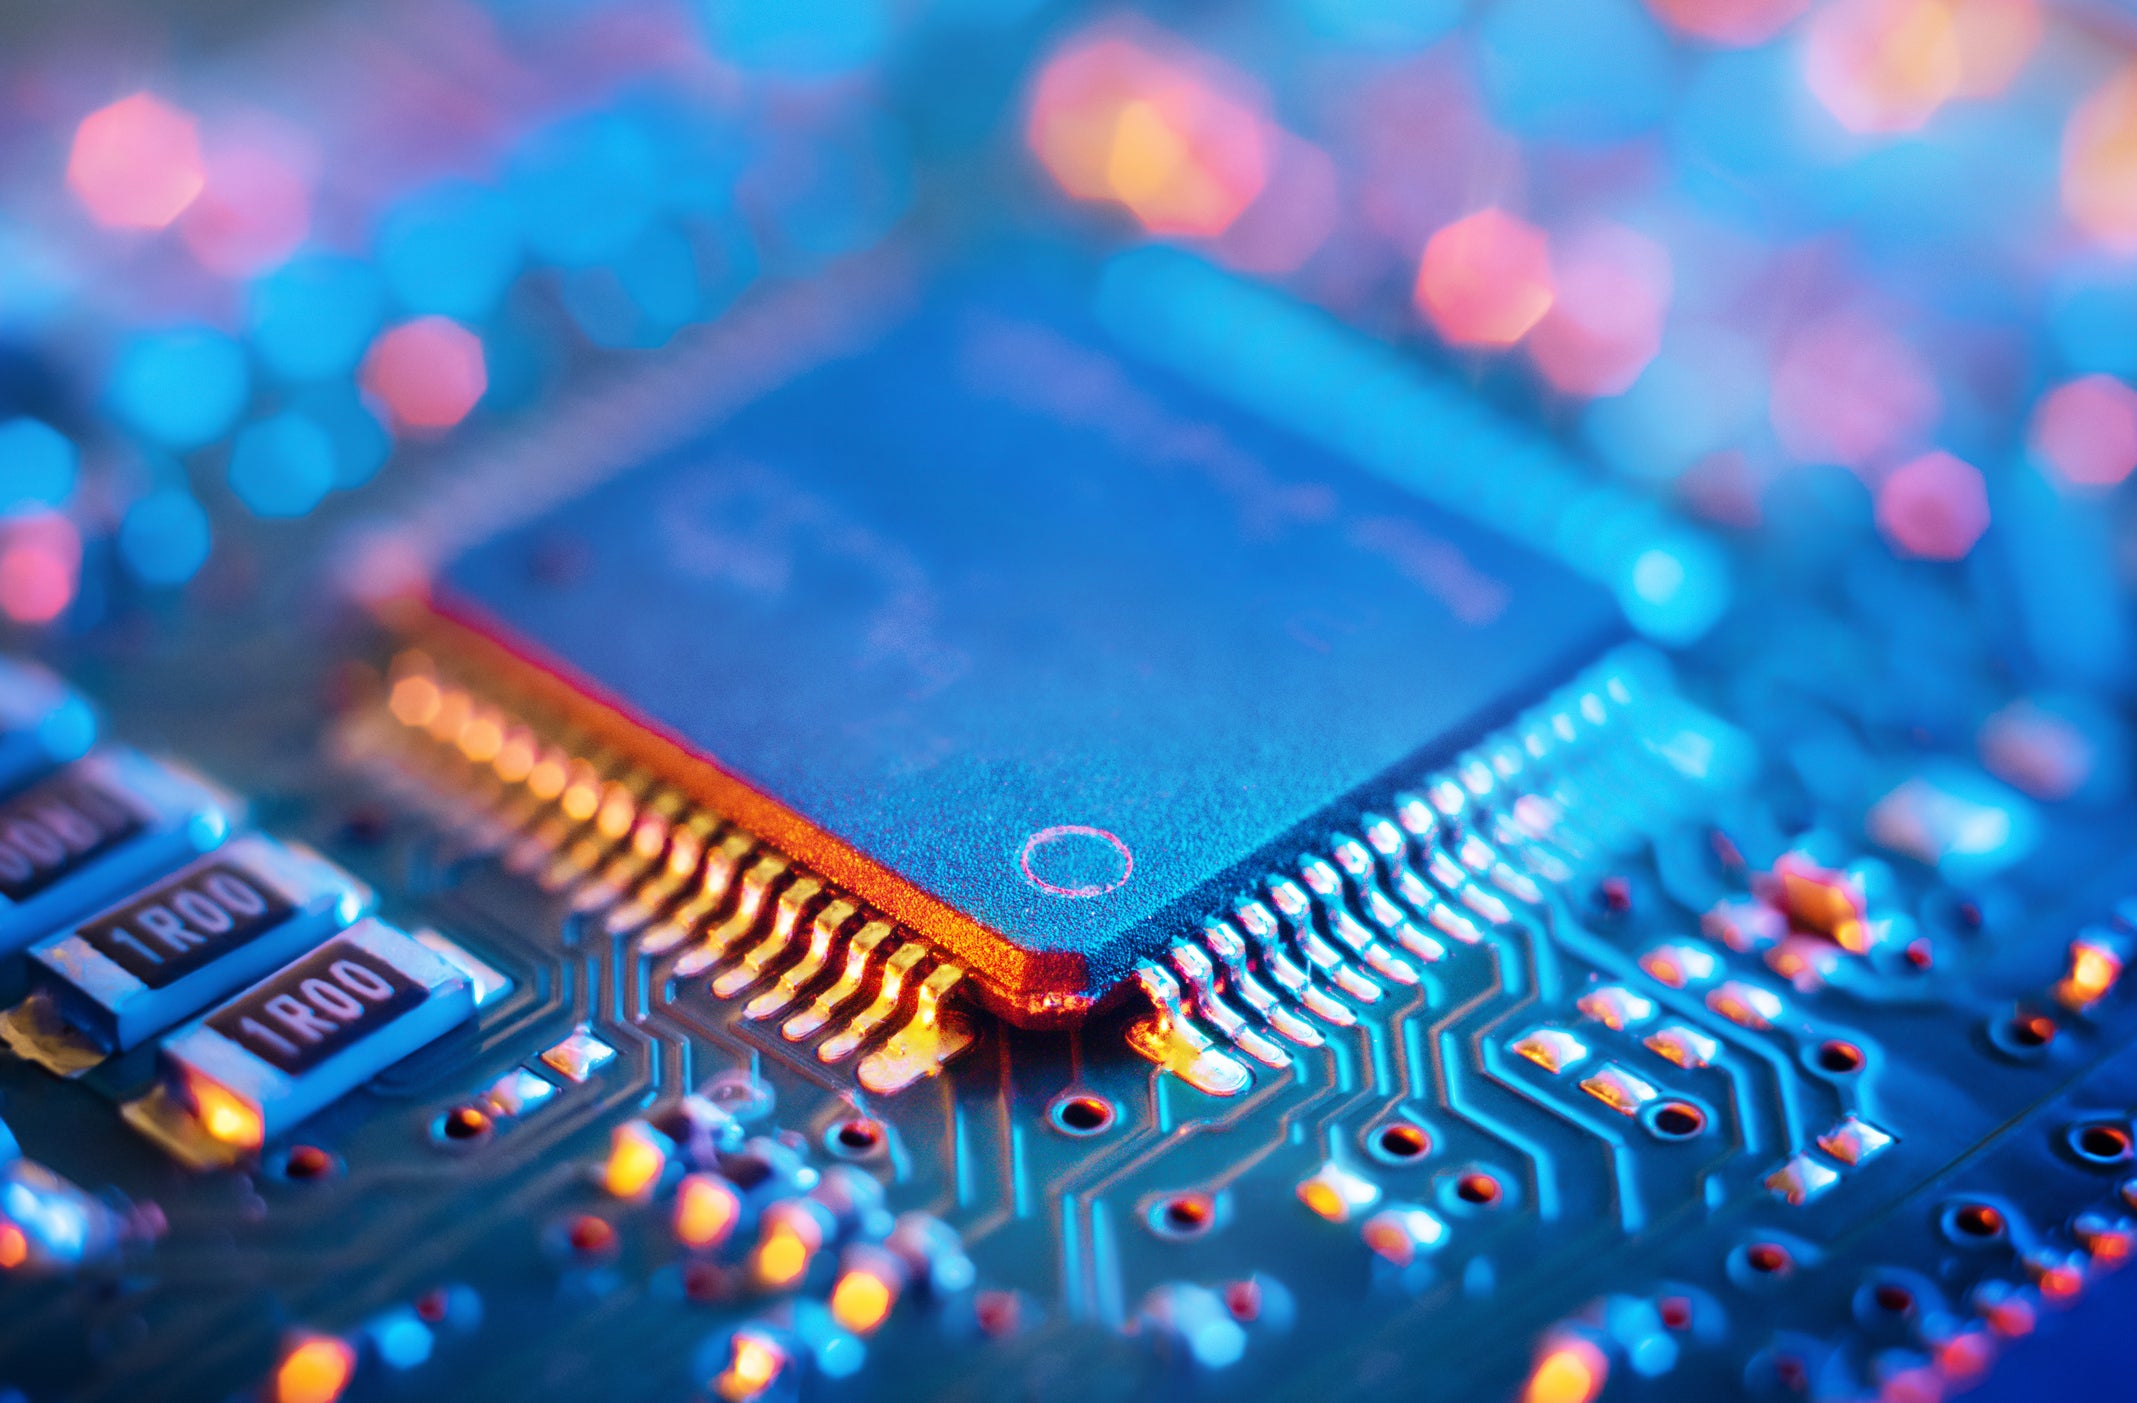 Will Japan Go Beyond U.S. in Semiconductor Export Controls?